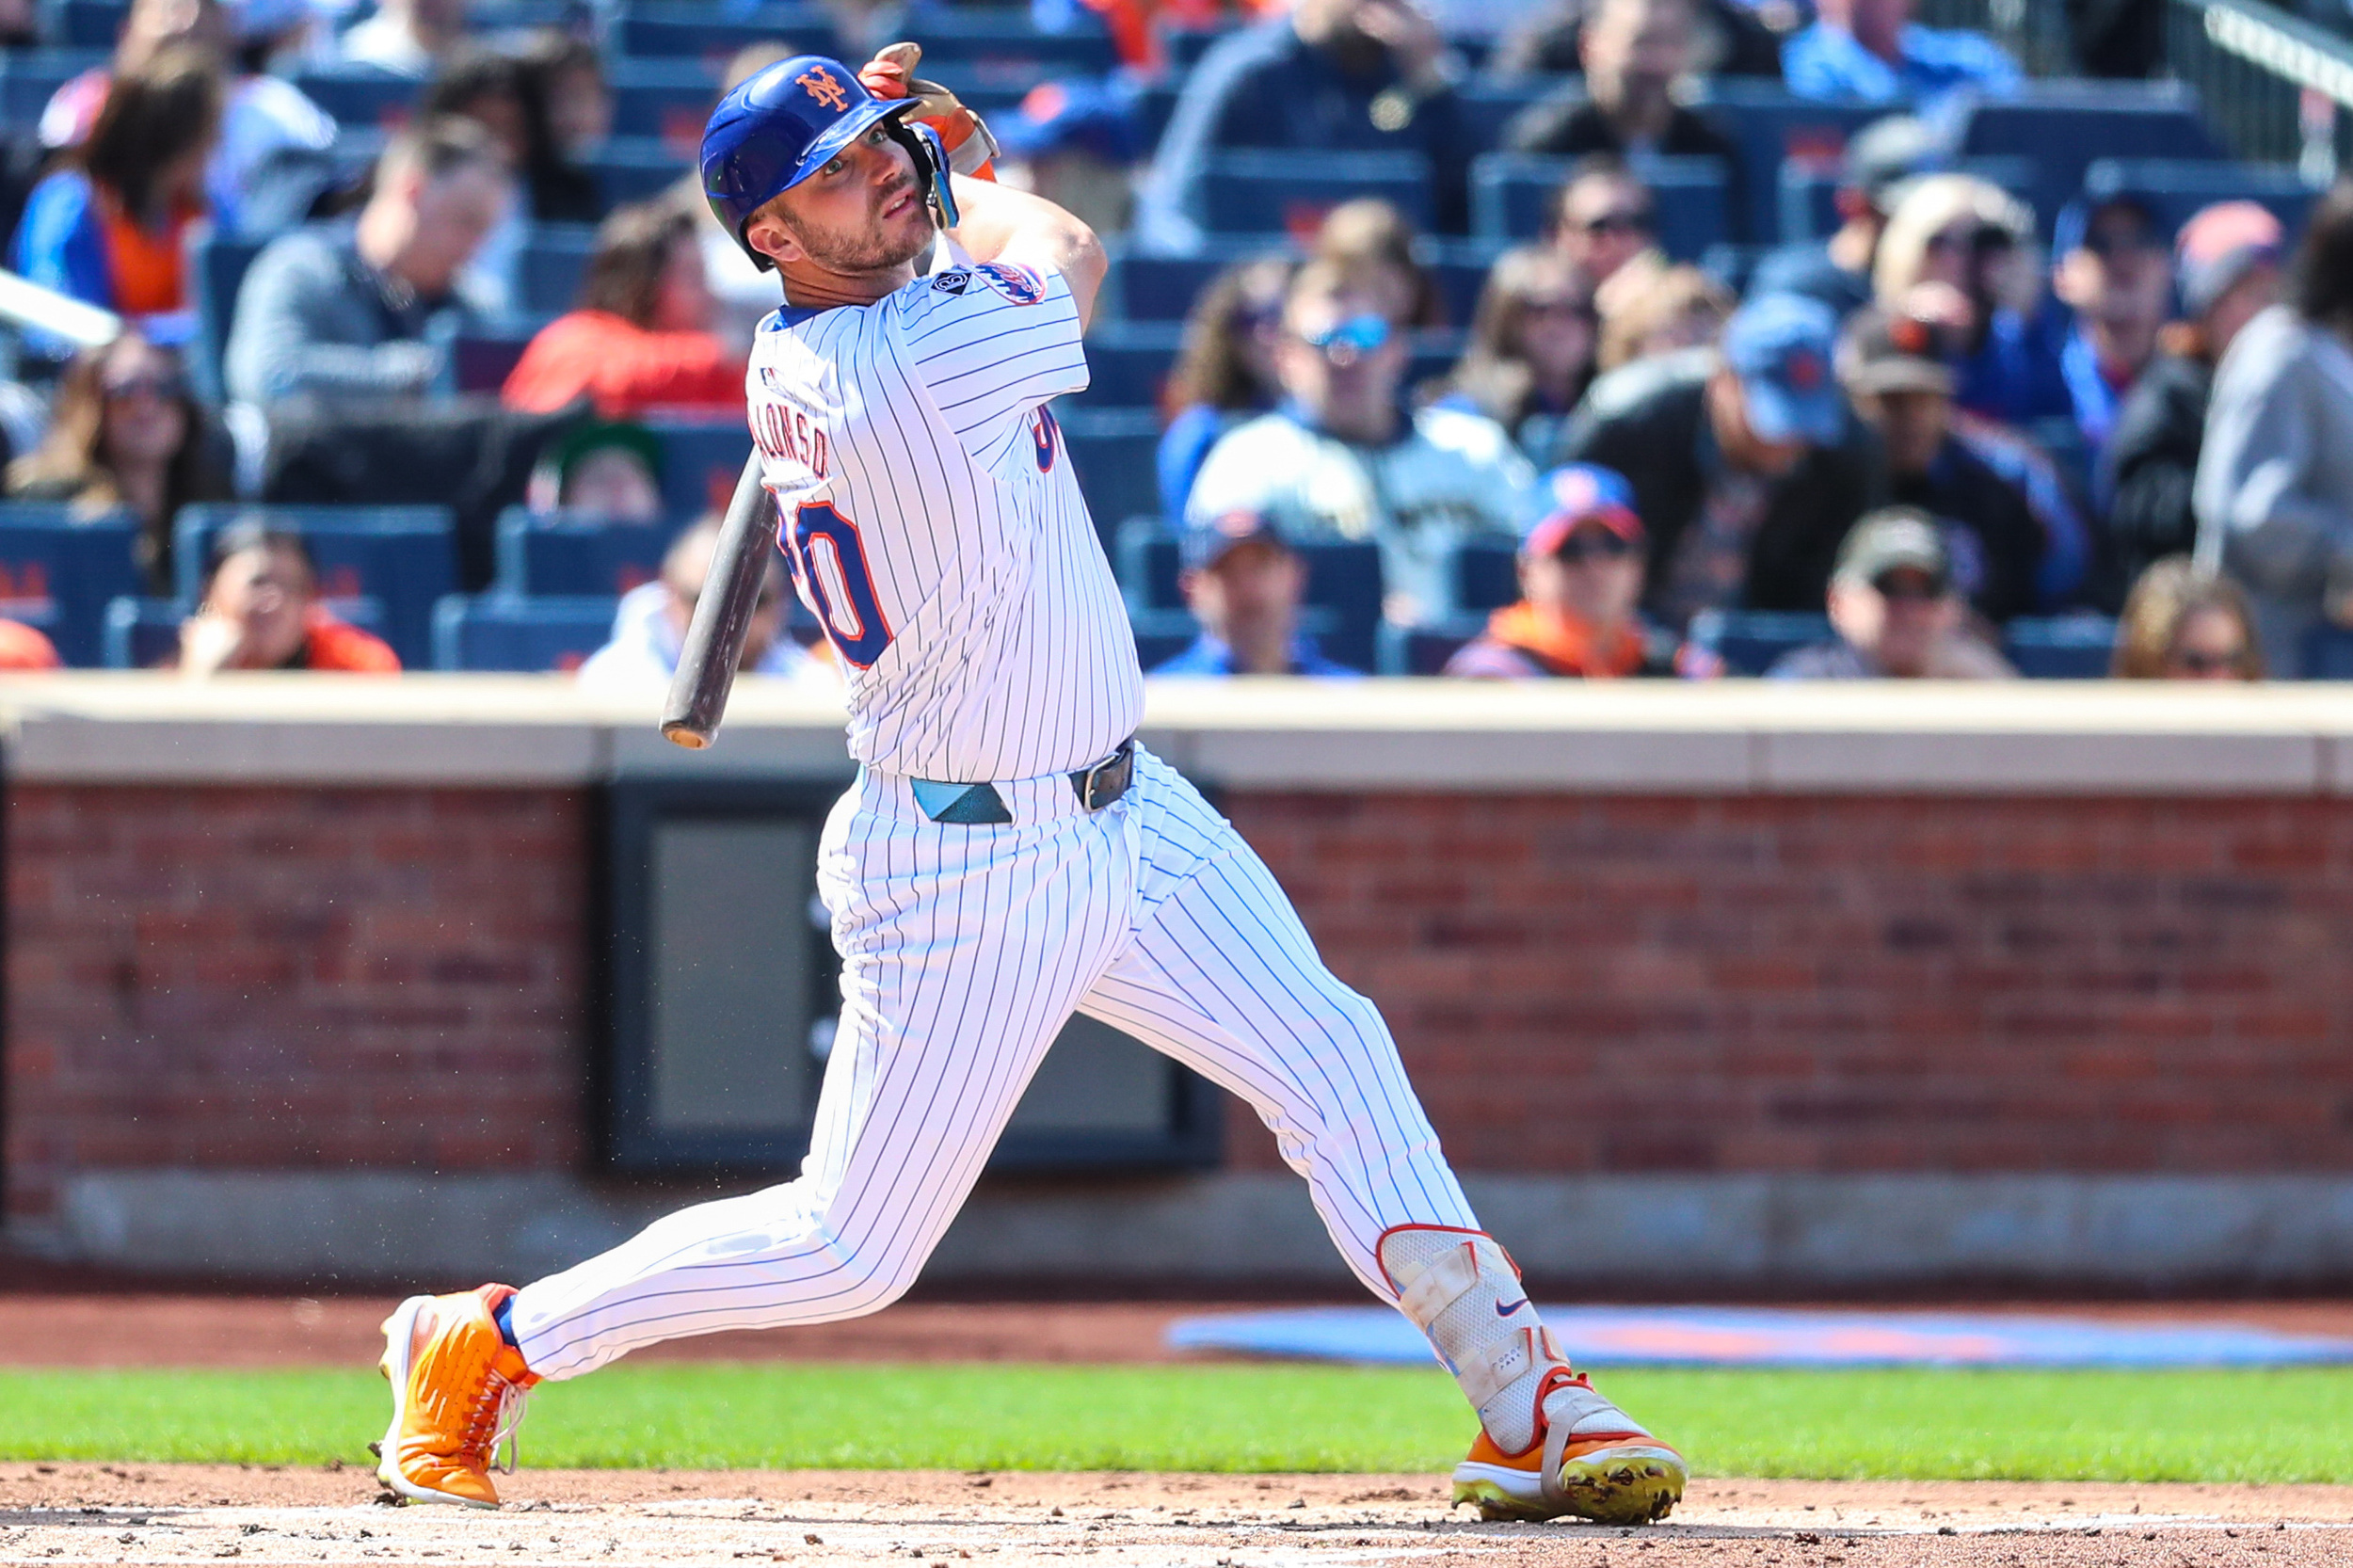 mlb writer makes big claim about how mets president views pete alonso